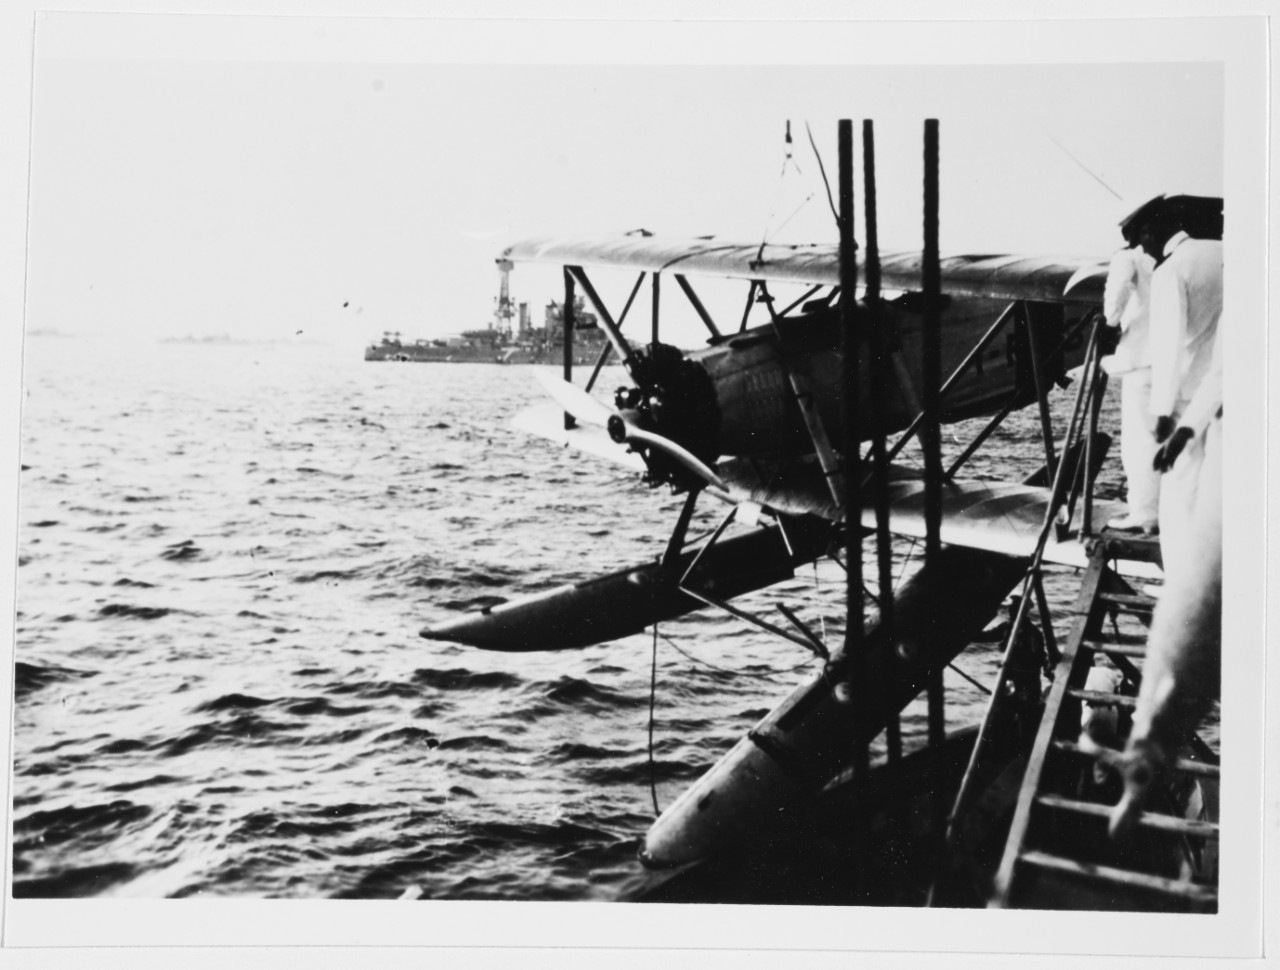 Naval Air Force TS-1 Airplane of Fighting Squadron One hoisted aboard USS COLORADO (BB-45) circa 1925-1927